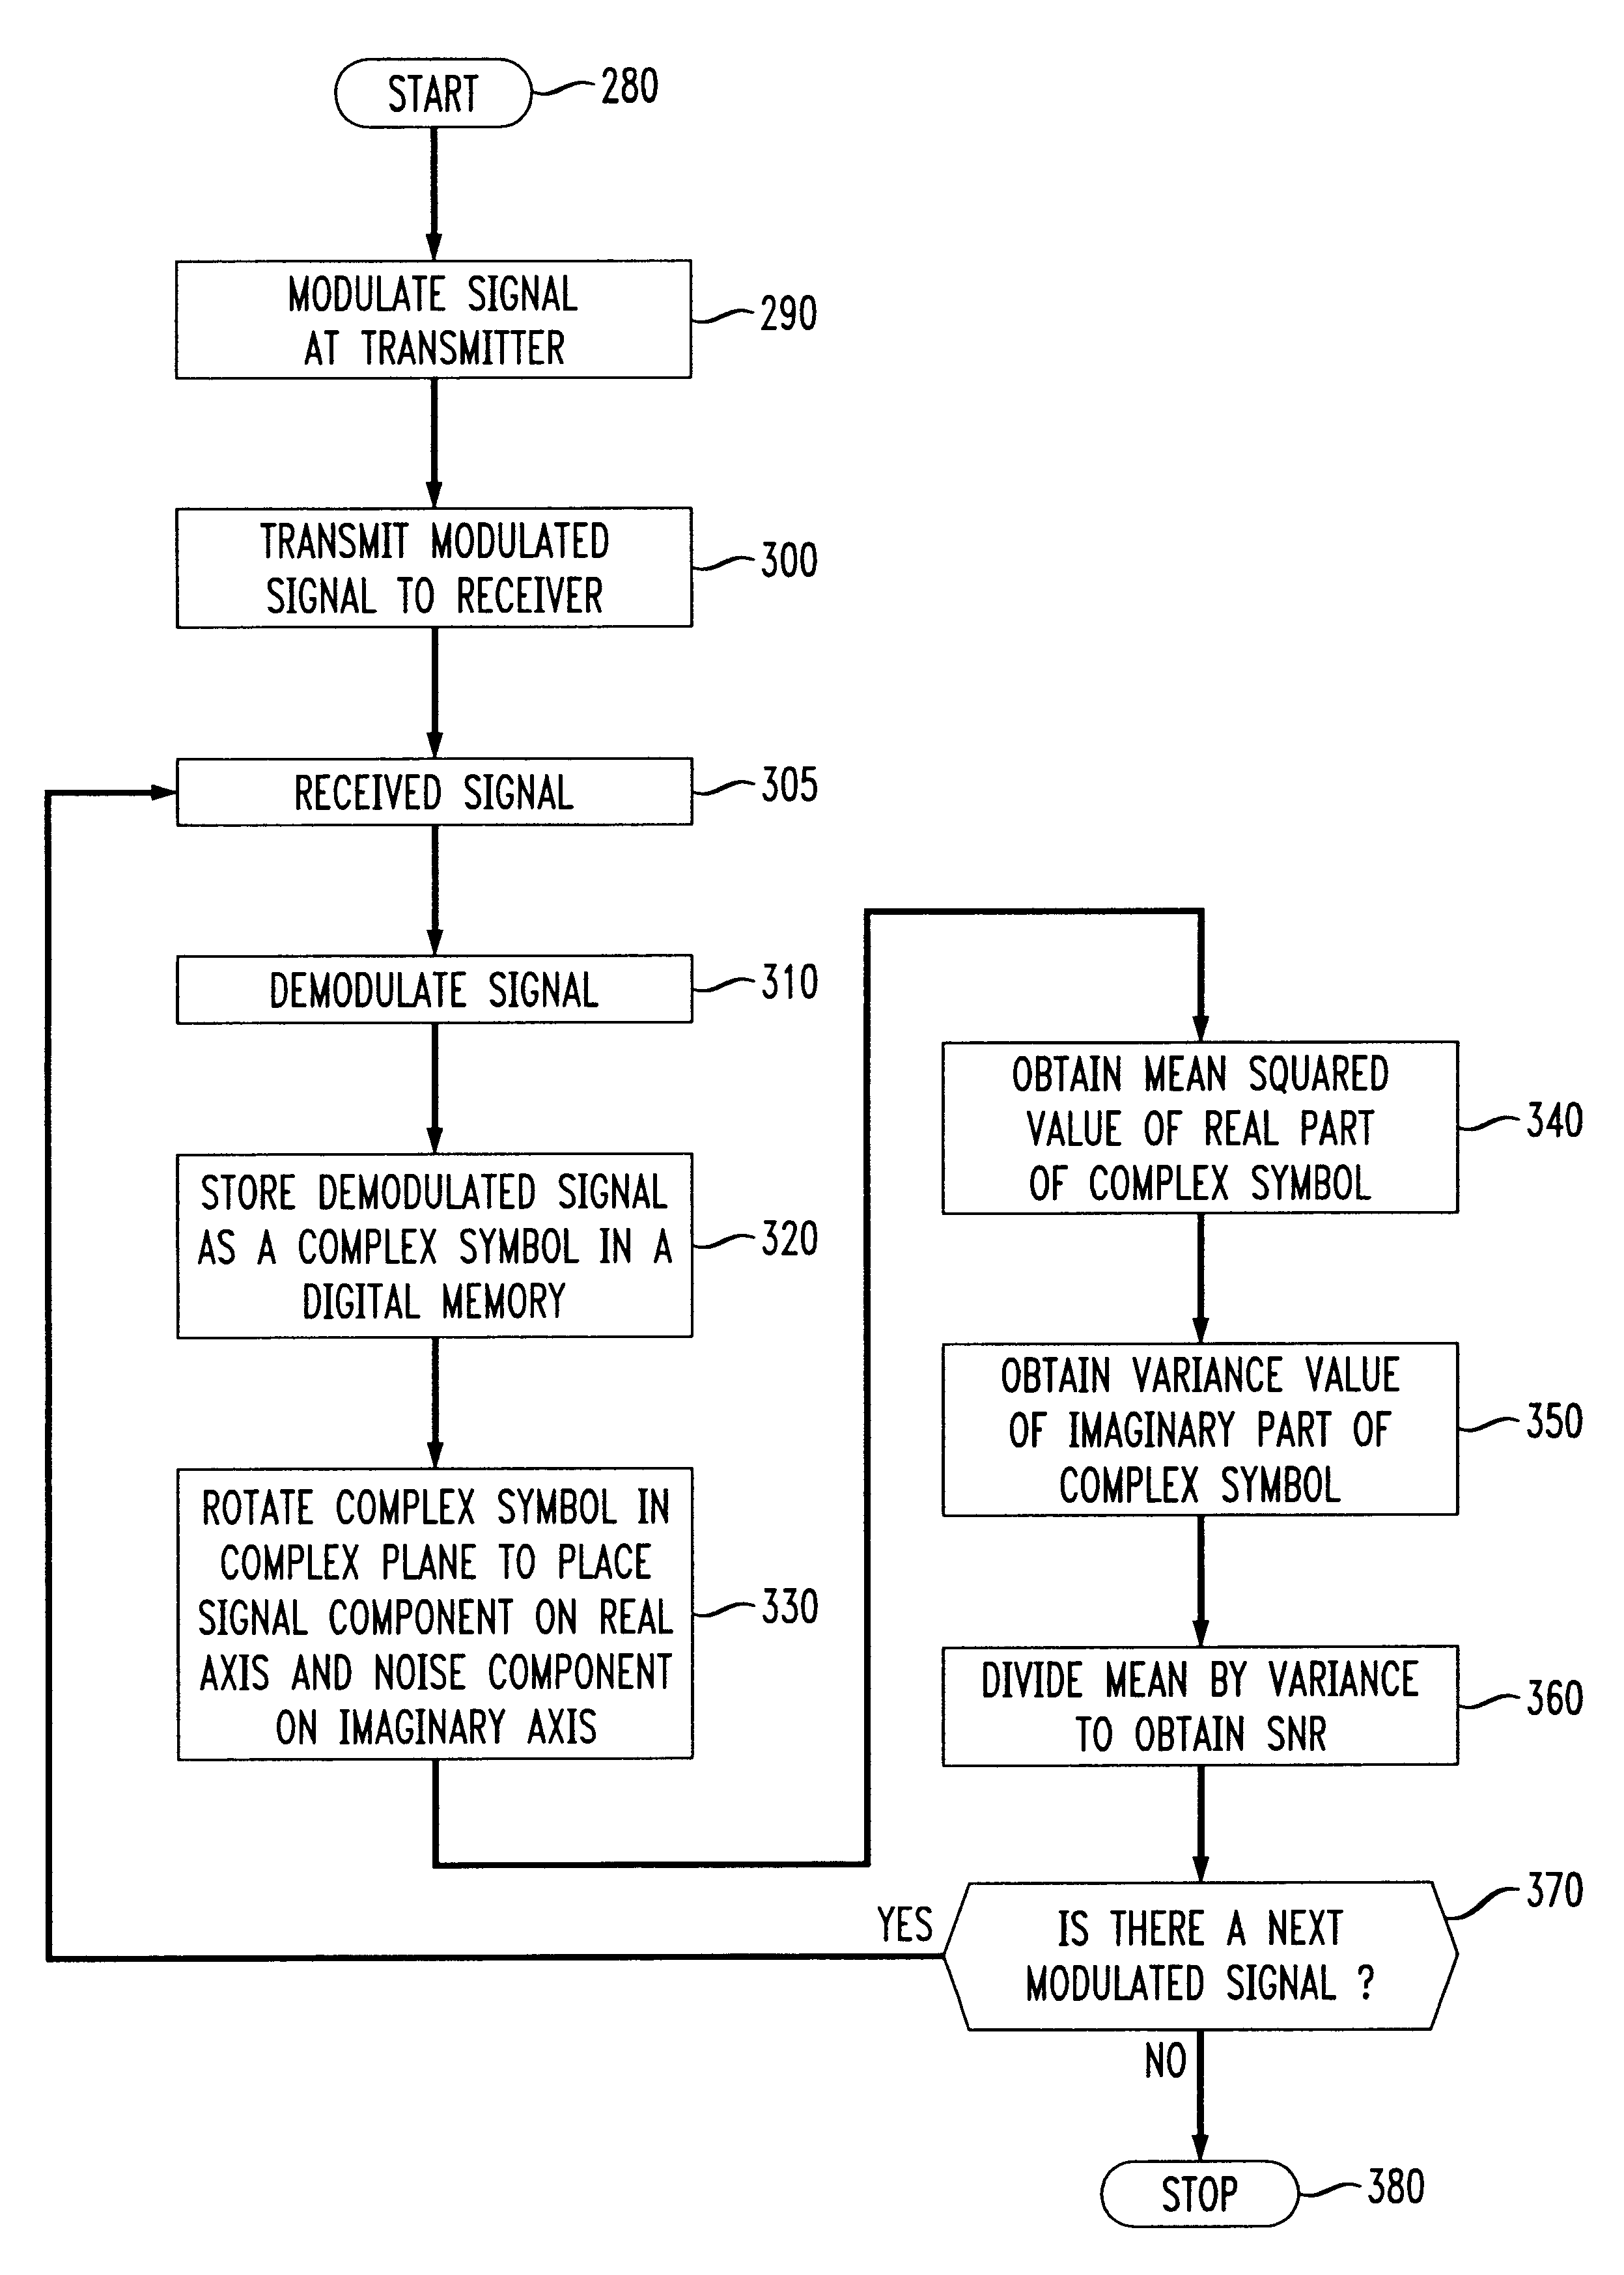 Methods of estimating signal-to-noise ratios